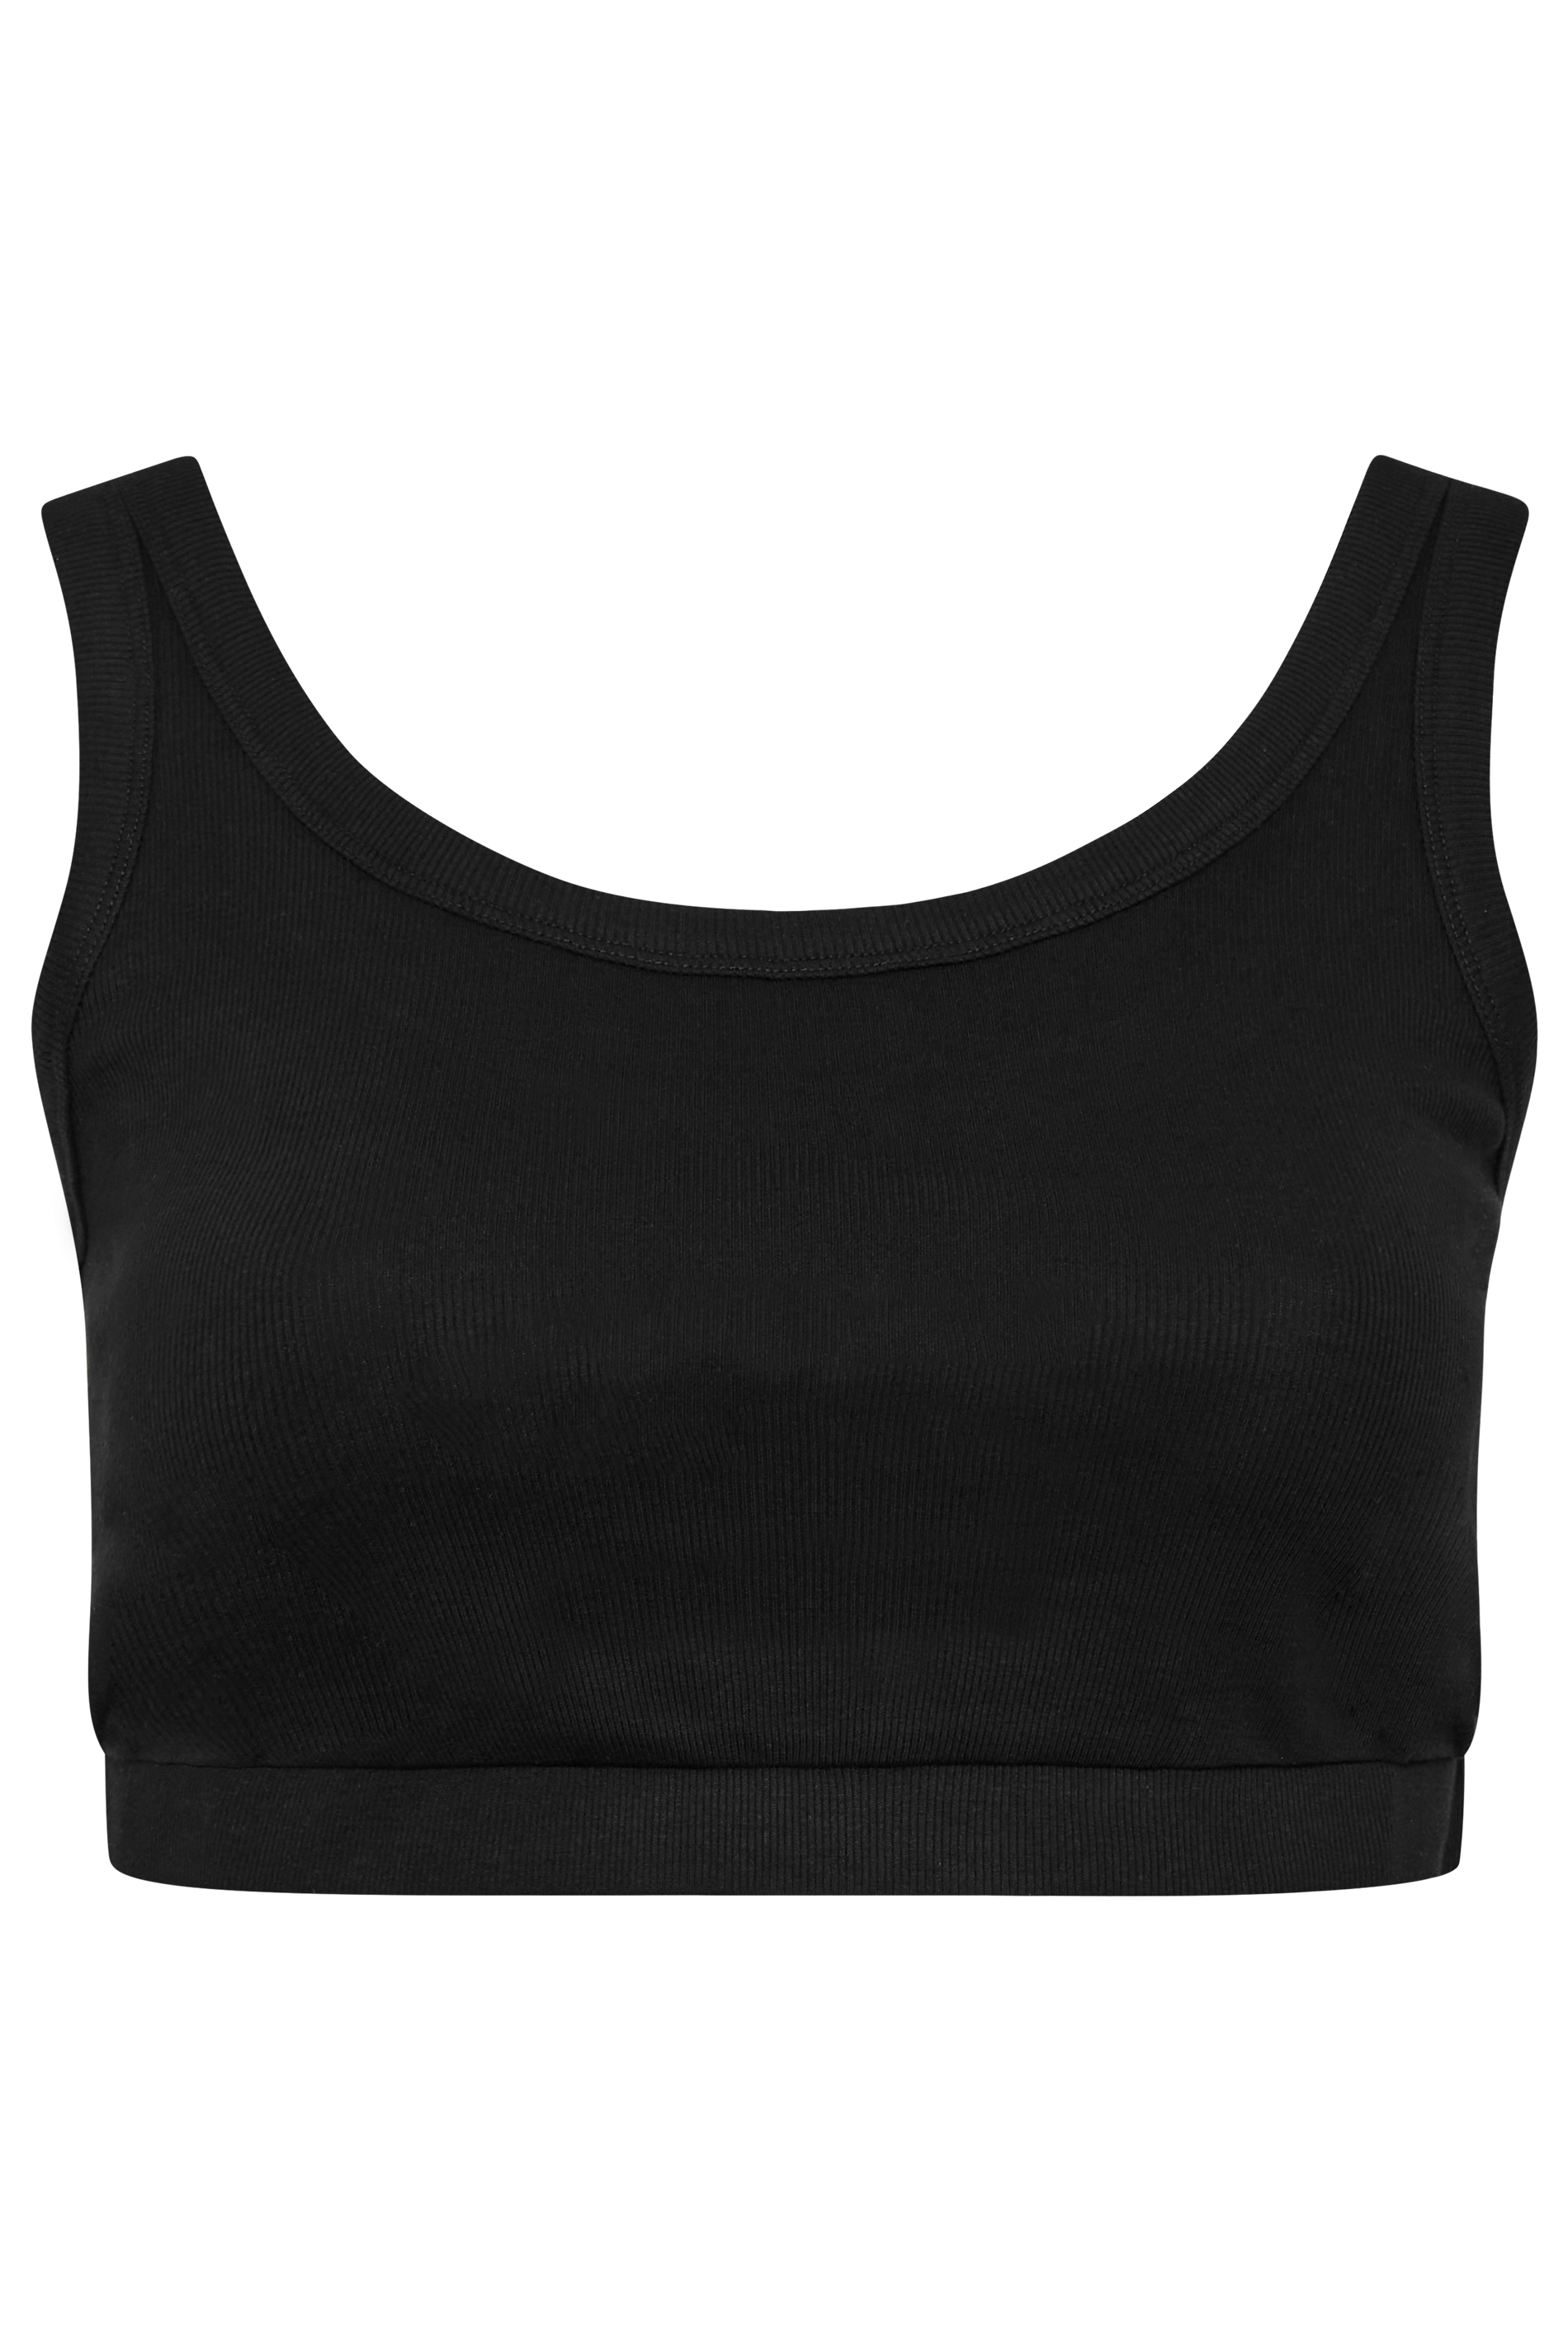 YOURS Plus Size Black Ribbed Crop Top